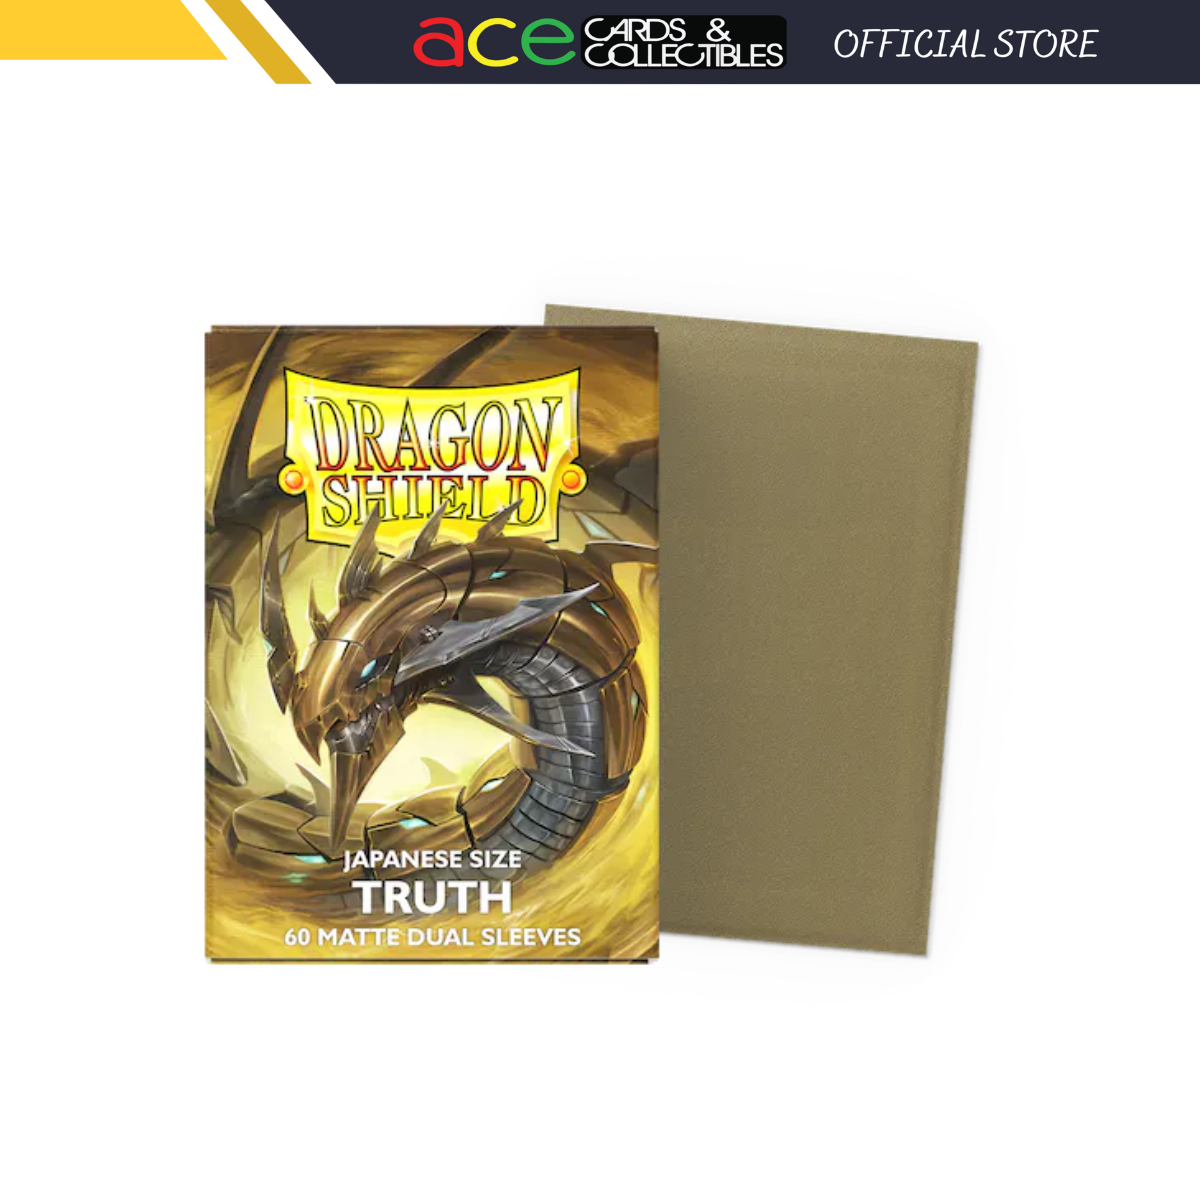 Dragon Shield Sleeve DS60J Matte DUAL Japanese size - Truth-Dragon Shield-Ace Cards & Collectibles